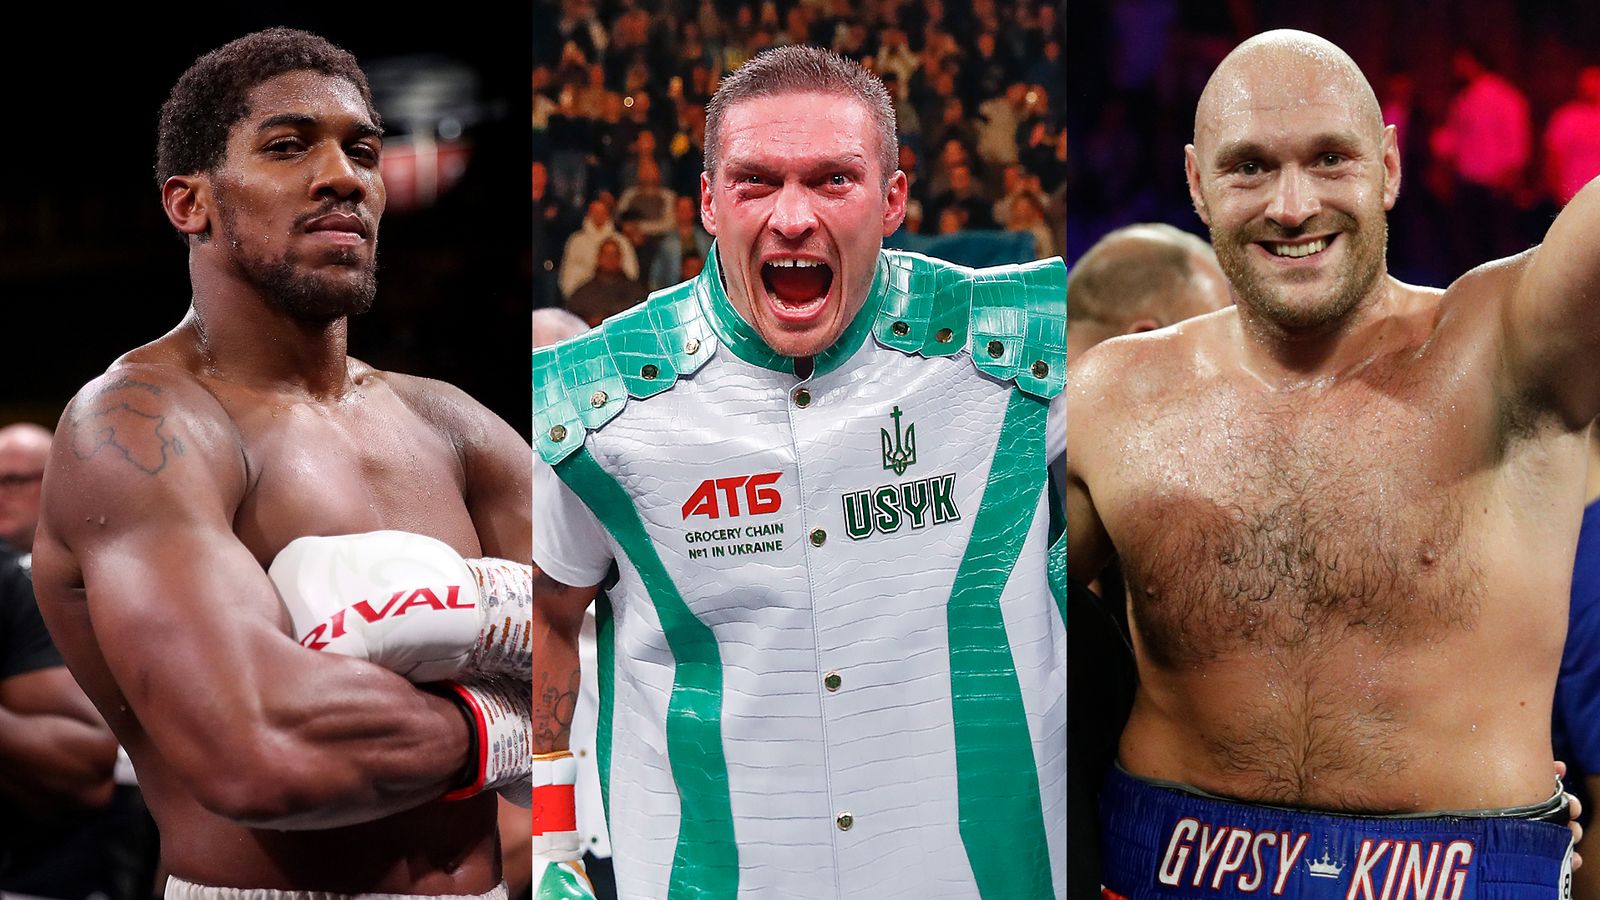 Oleksandr Usyk vs Tyson Fury? After Usyk defeats Anthony Joshua again, says his promoter Boxing News Sky Sports